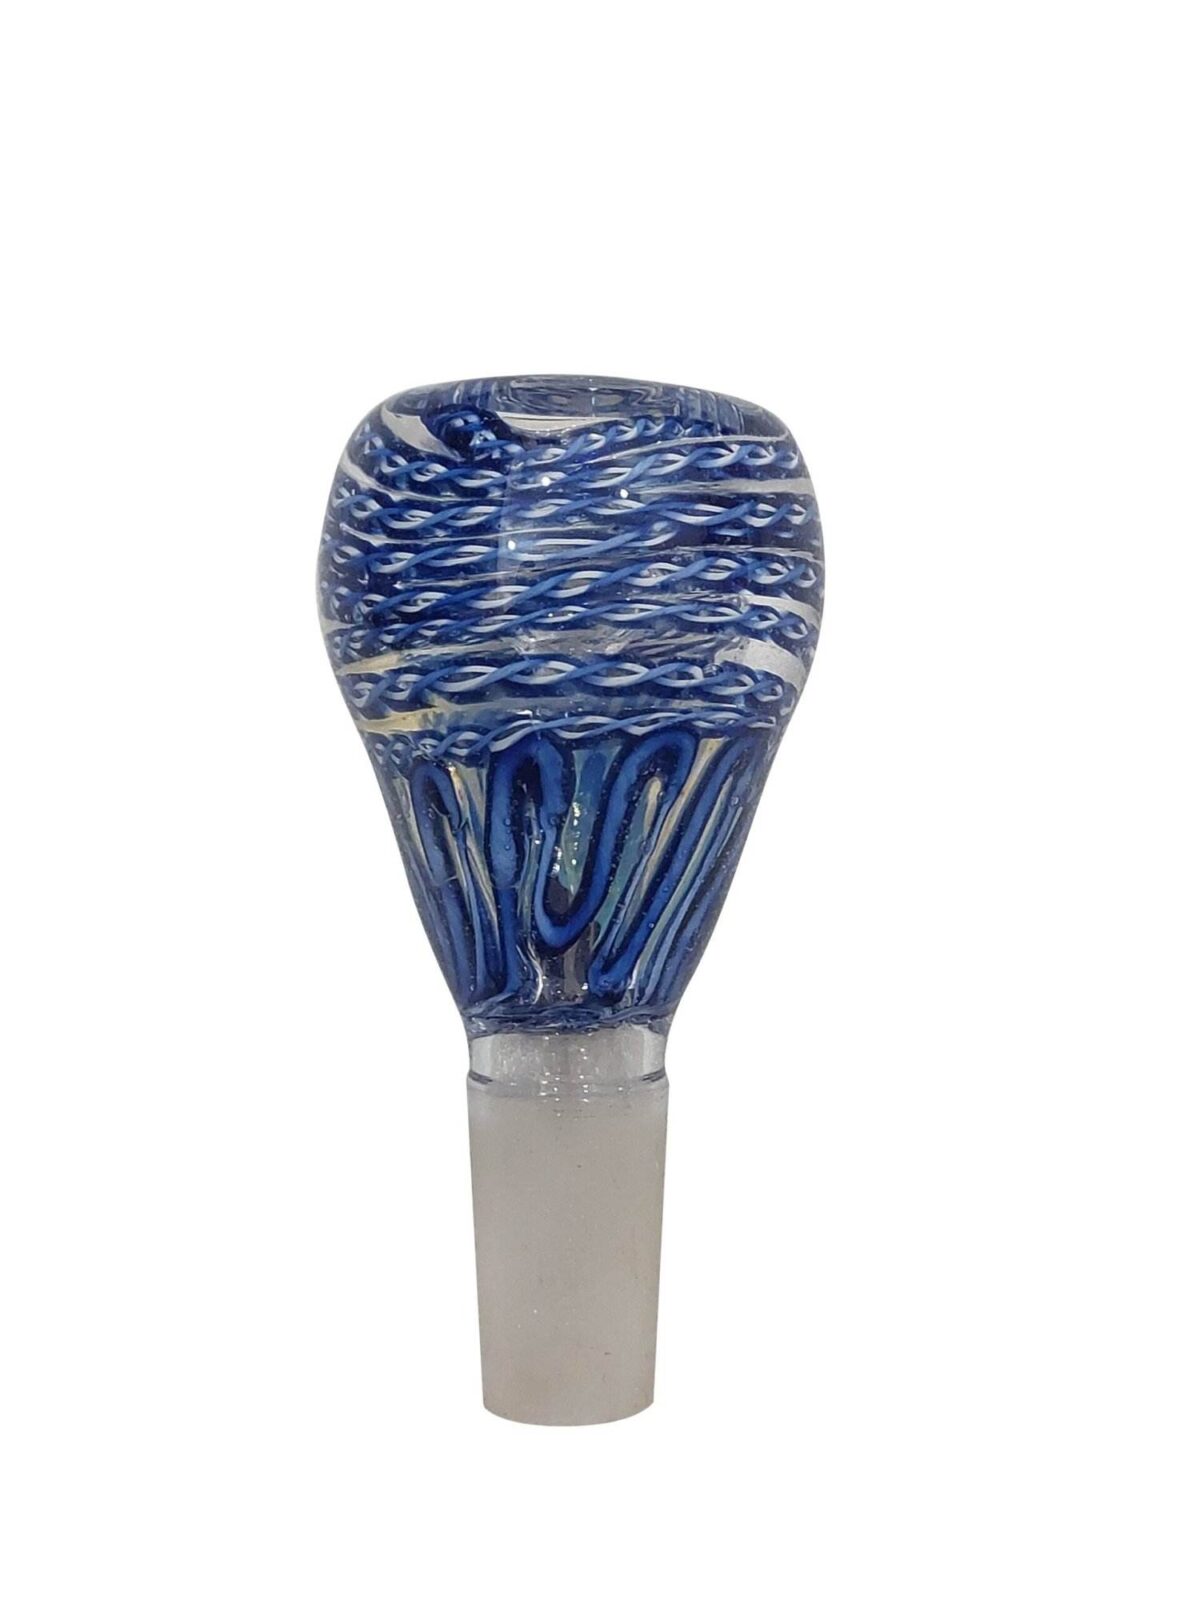 Best glass bowls for bongs Delhi NCR, High-quality glass bong bowls online, 14mm and 19mm bong accessories India, Top-rated glass bong bowls Delhi, Affordable 14mm bong bowls online, 19mm glass bowls for smoking accessories, Shop glass bong bowls Delhi NCR, Premium glass bowls for bongs online, Exclusive 14/19mm bong bowls India, Glass bong accessories online India, Best online store for glass bowls Delhi,14/19mm glass bowls for sale India, bong parts online in delhi ncr india